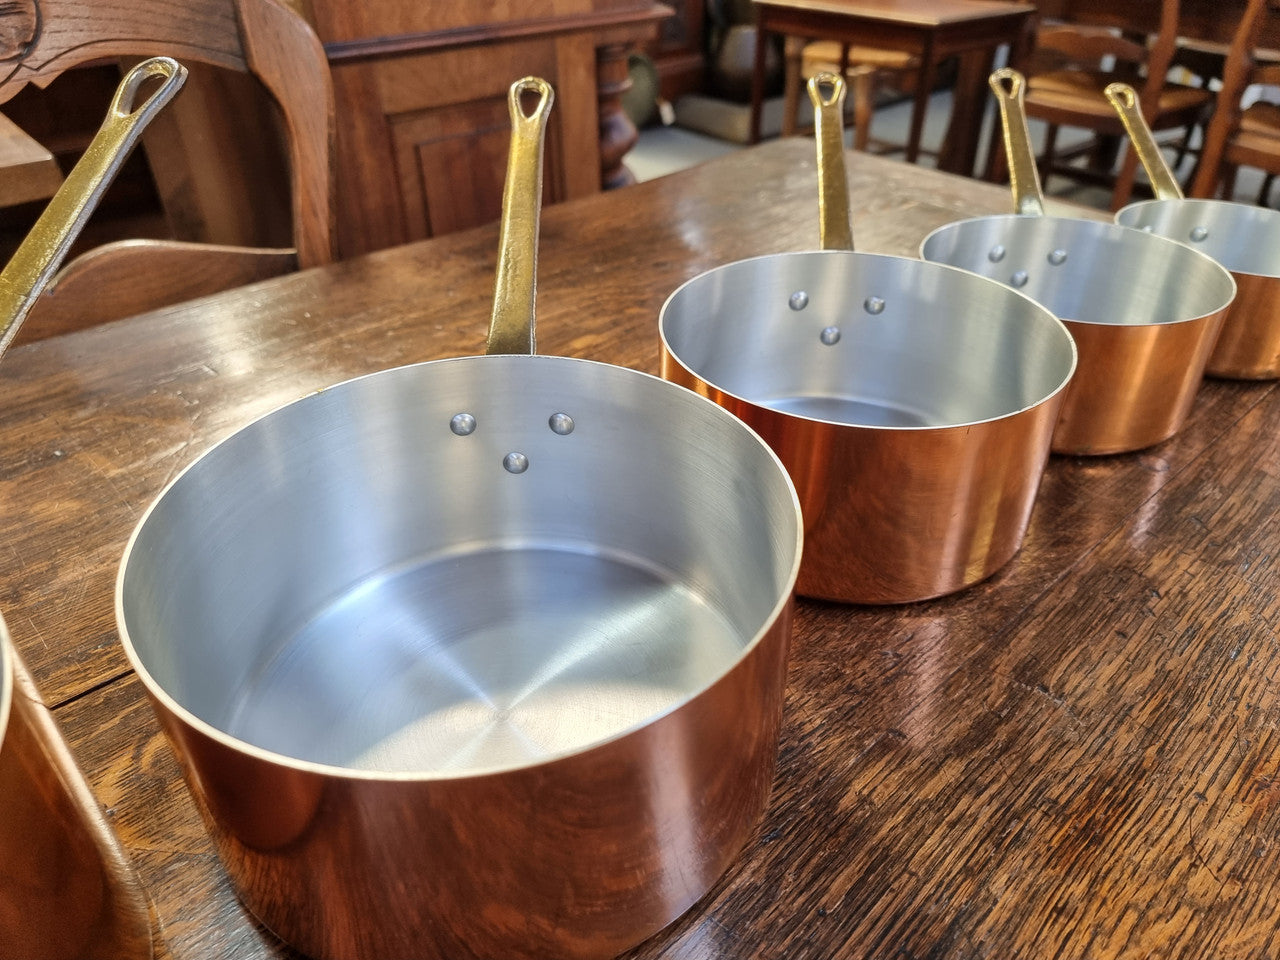 Set of Five French Vintage Copper & Brass Saucepans. They are in amazing original condition.